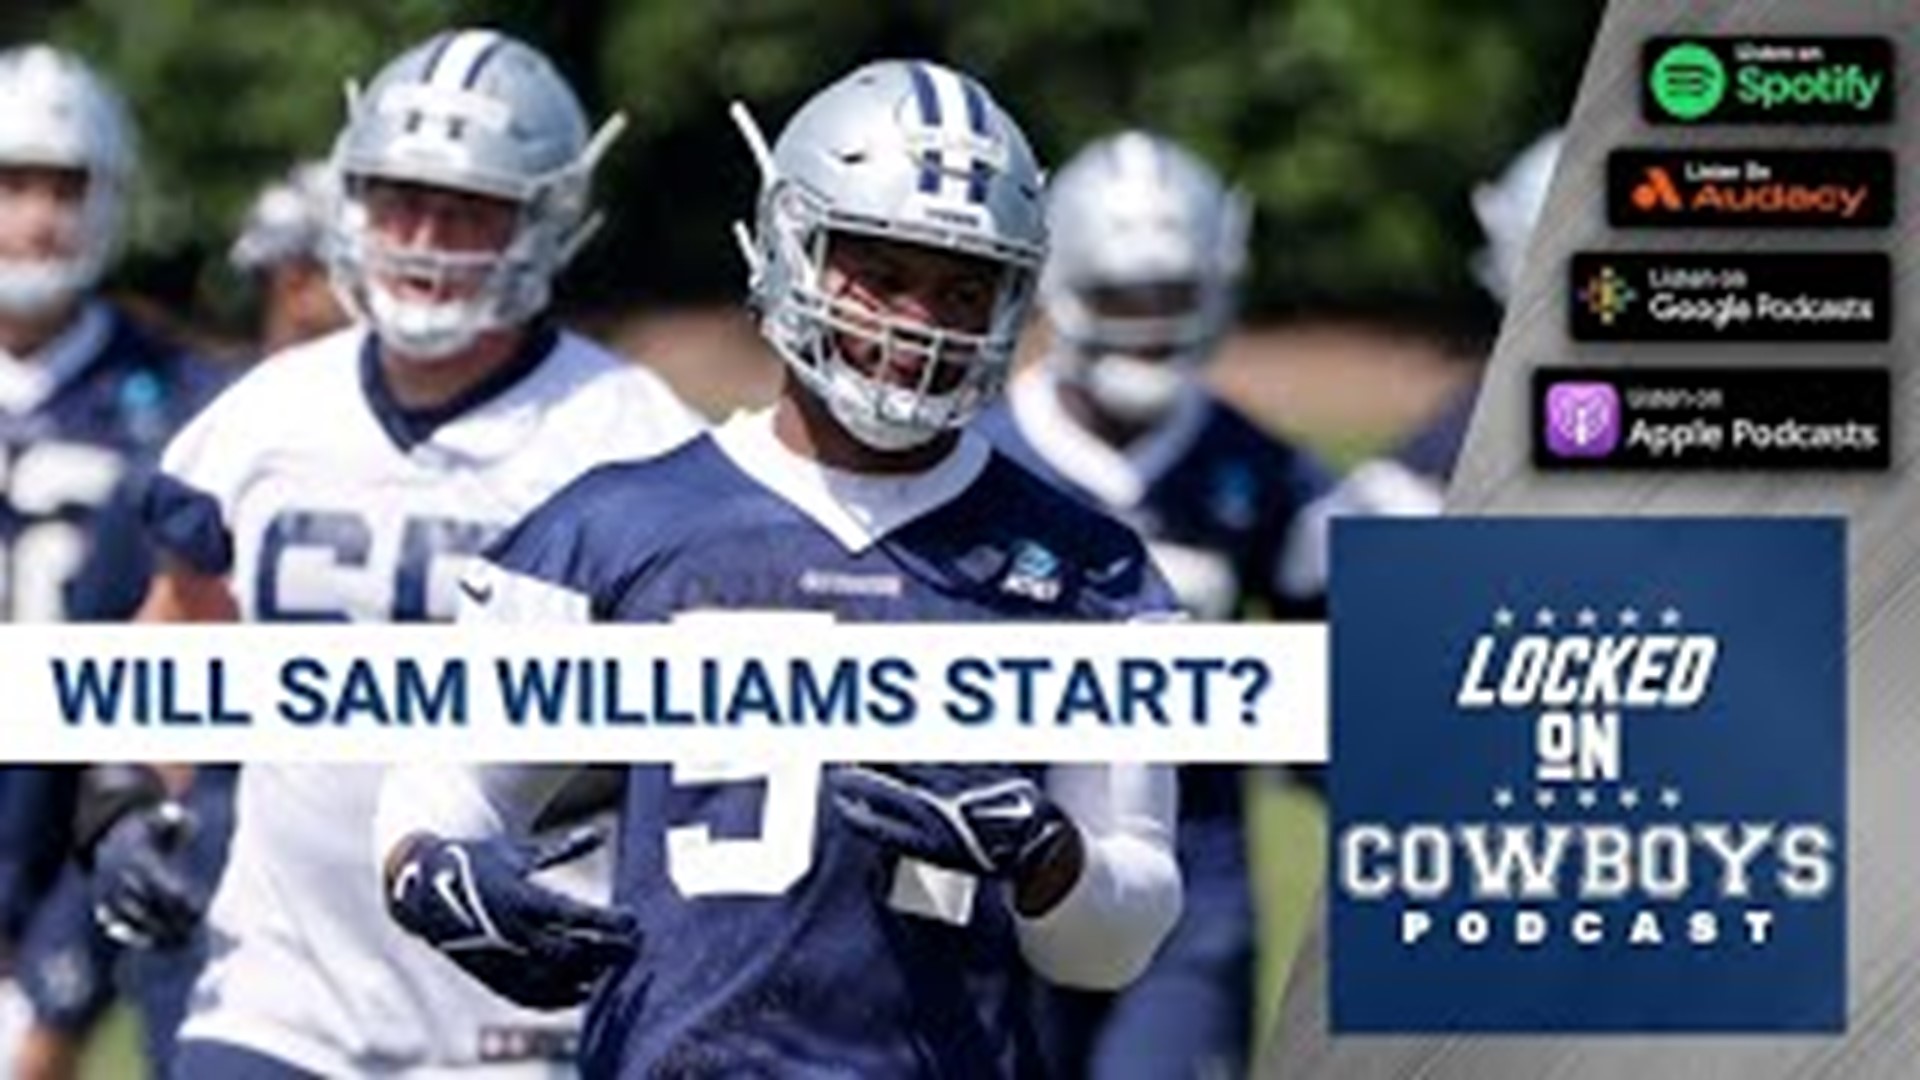 Marcus Mosher and Landon McCool of Locked On Cowboys answer your Twitter questions, including will Sam Williams start in 2022?